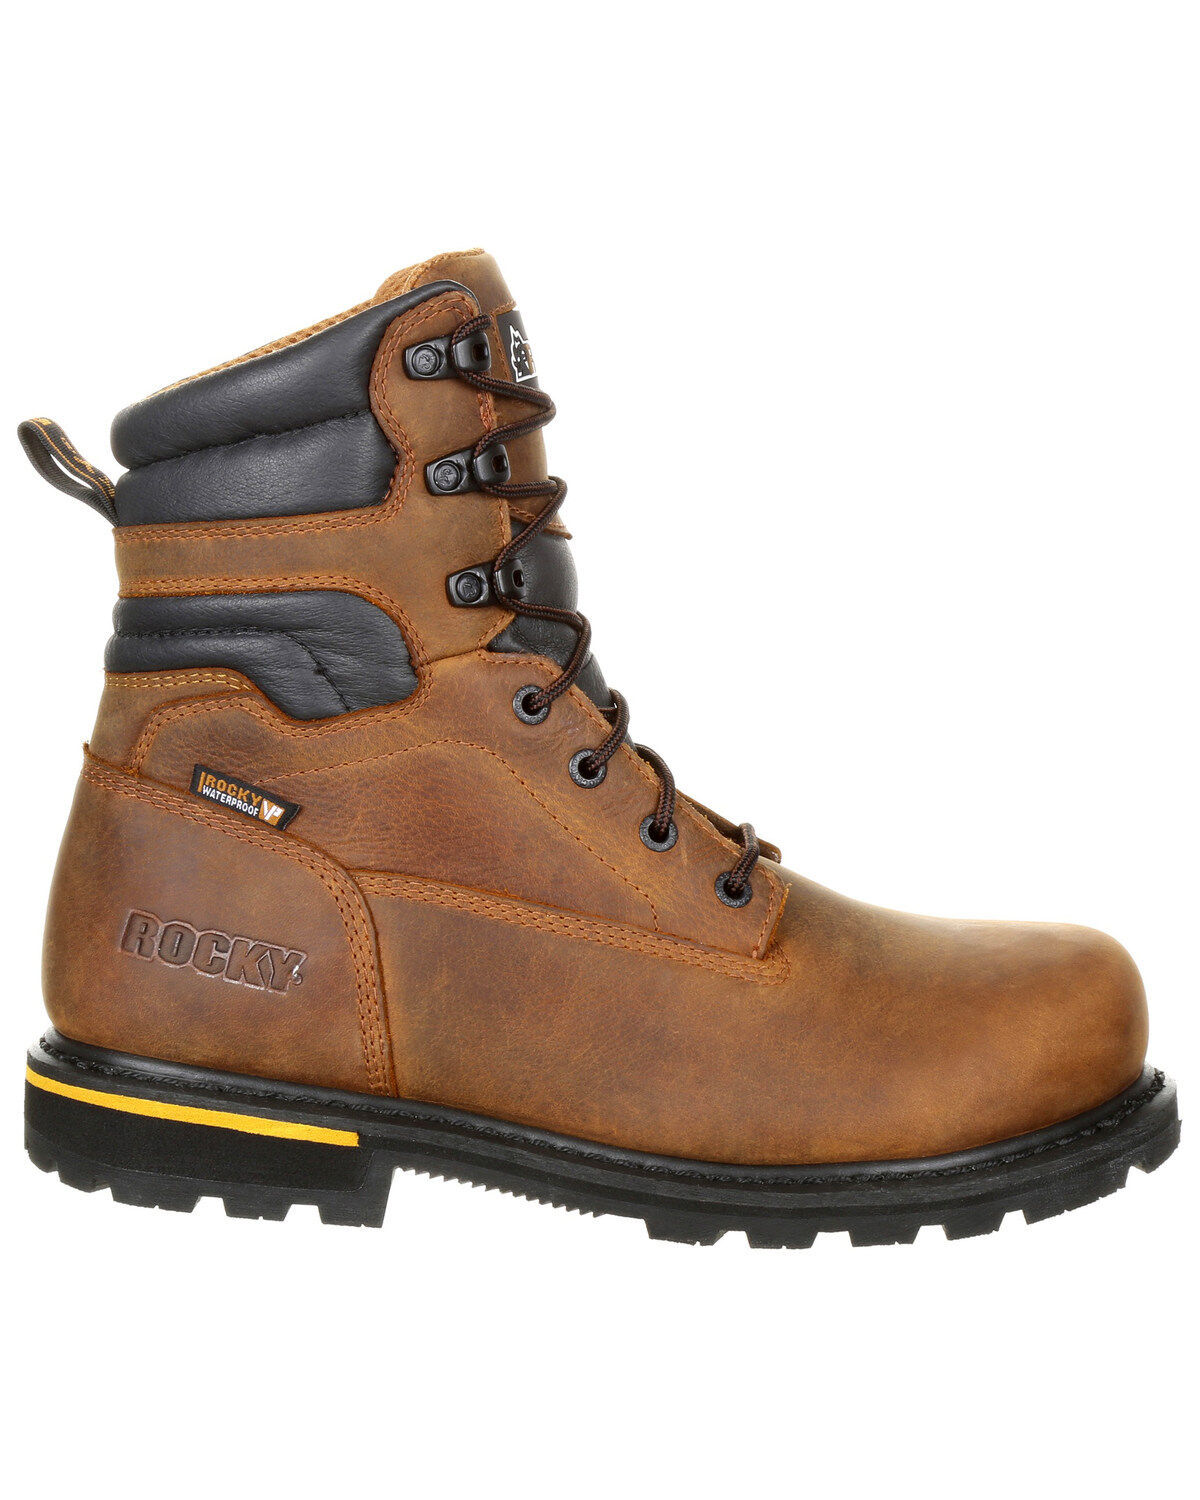 Work Boots - Composite Toe | Boot Barn